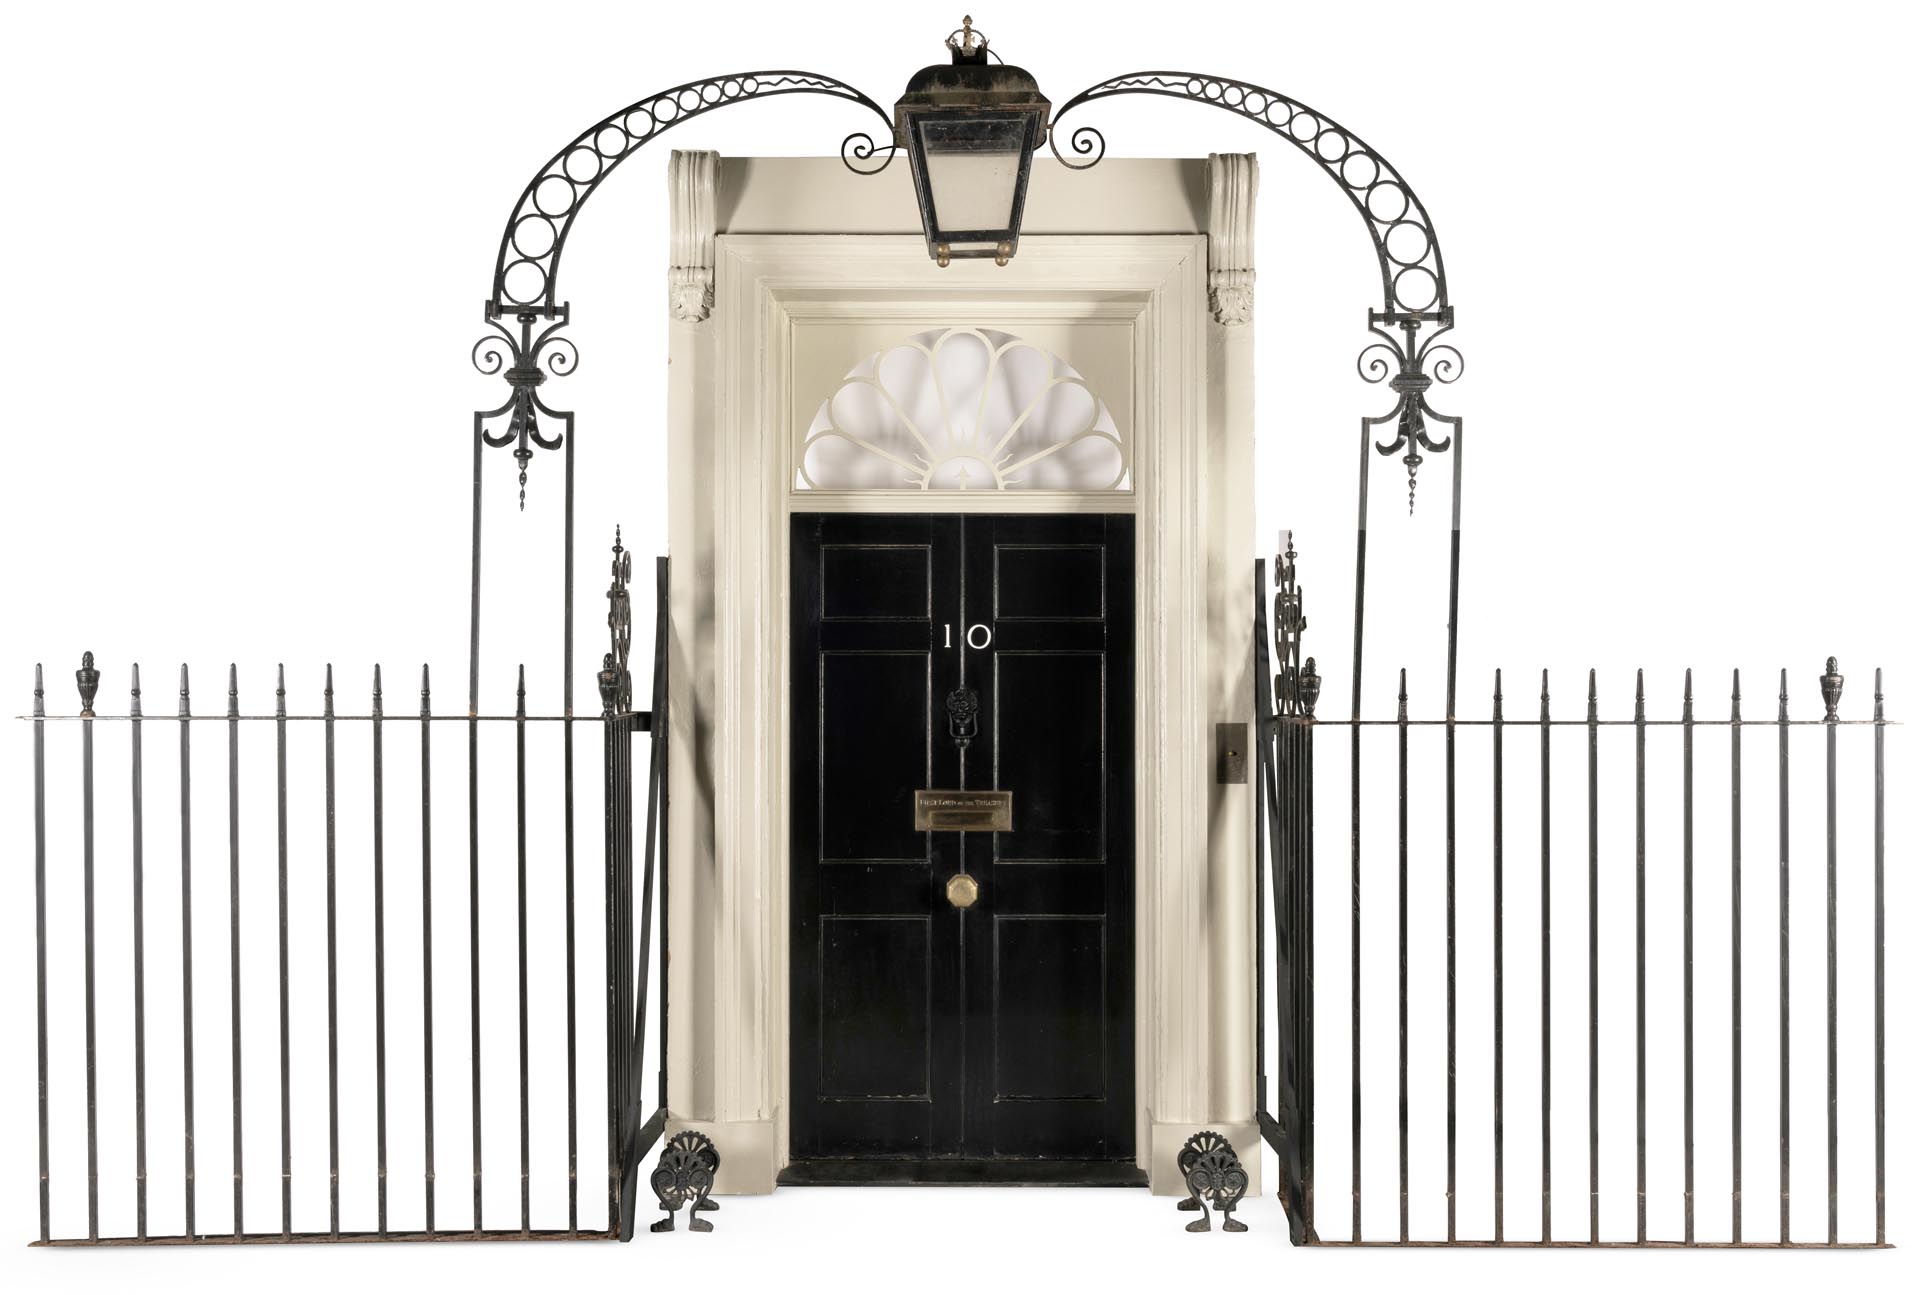 The 10 Downing Street Facade to include lantern railings and boot scraper. Estimate 20000 30000